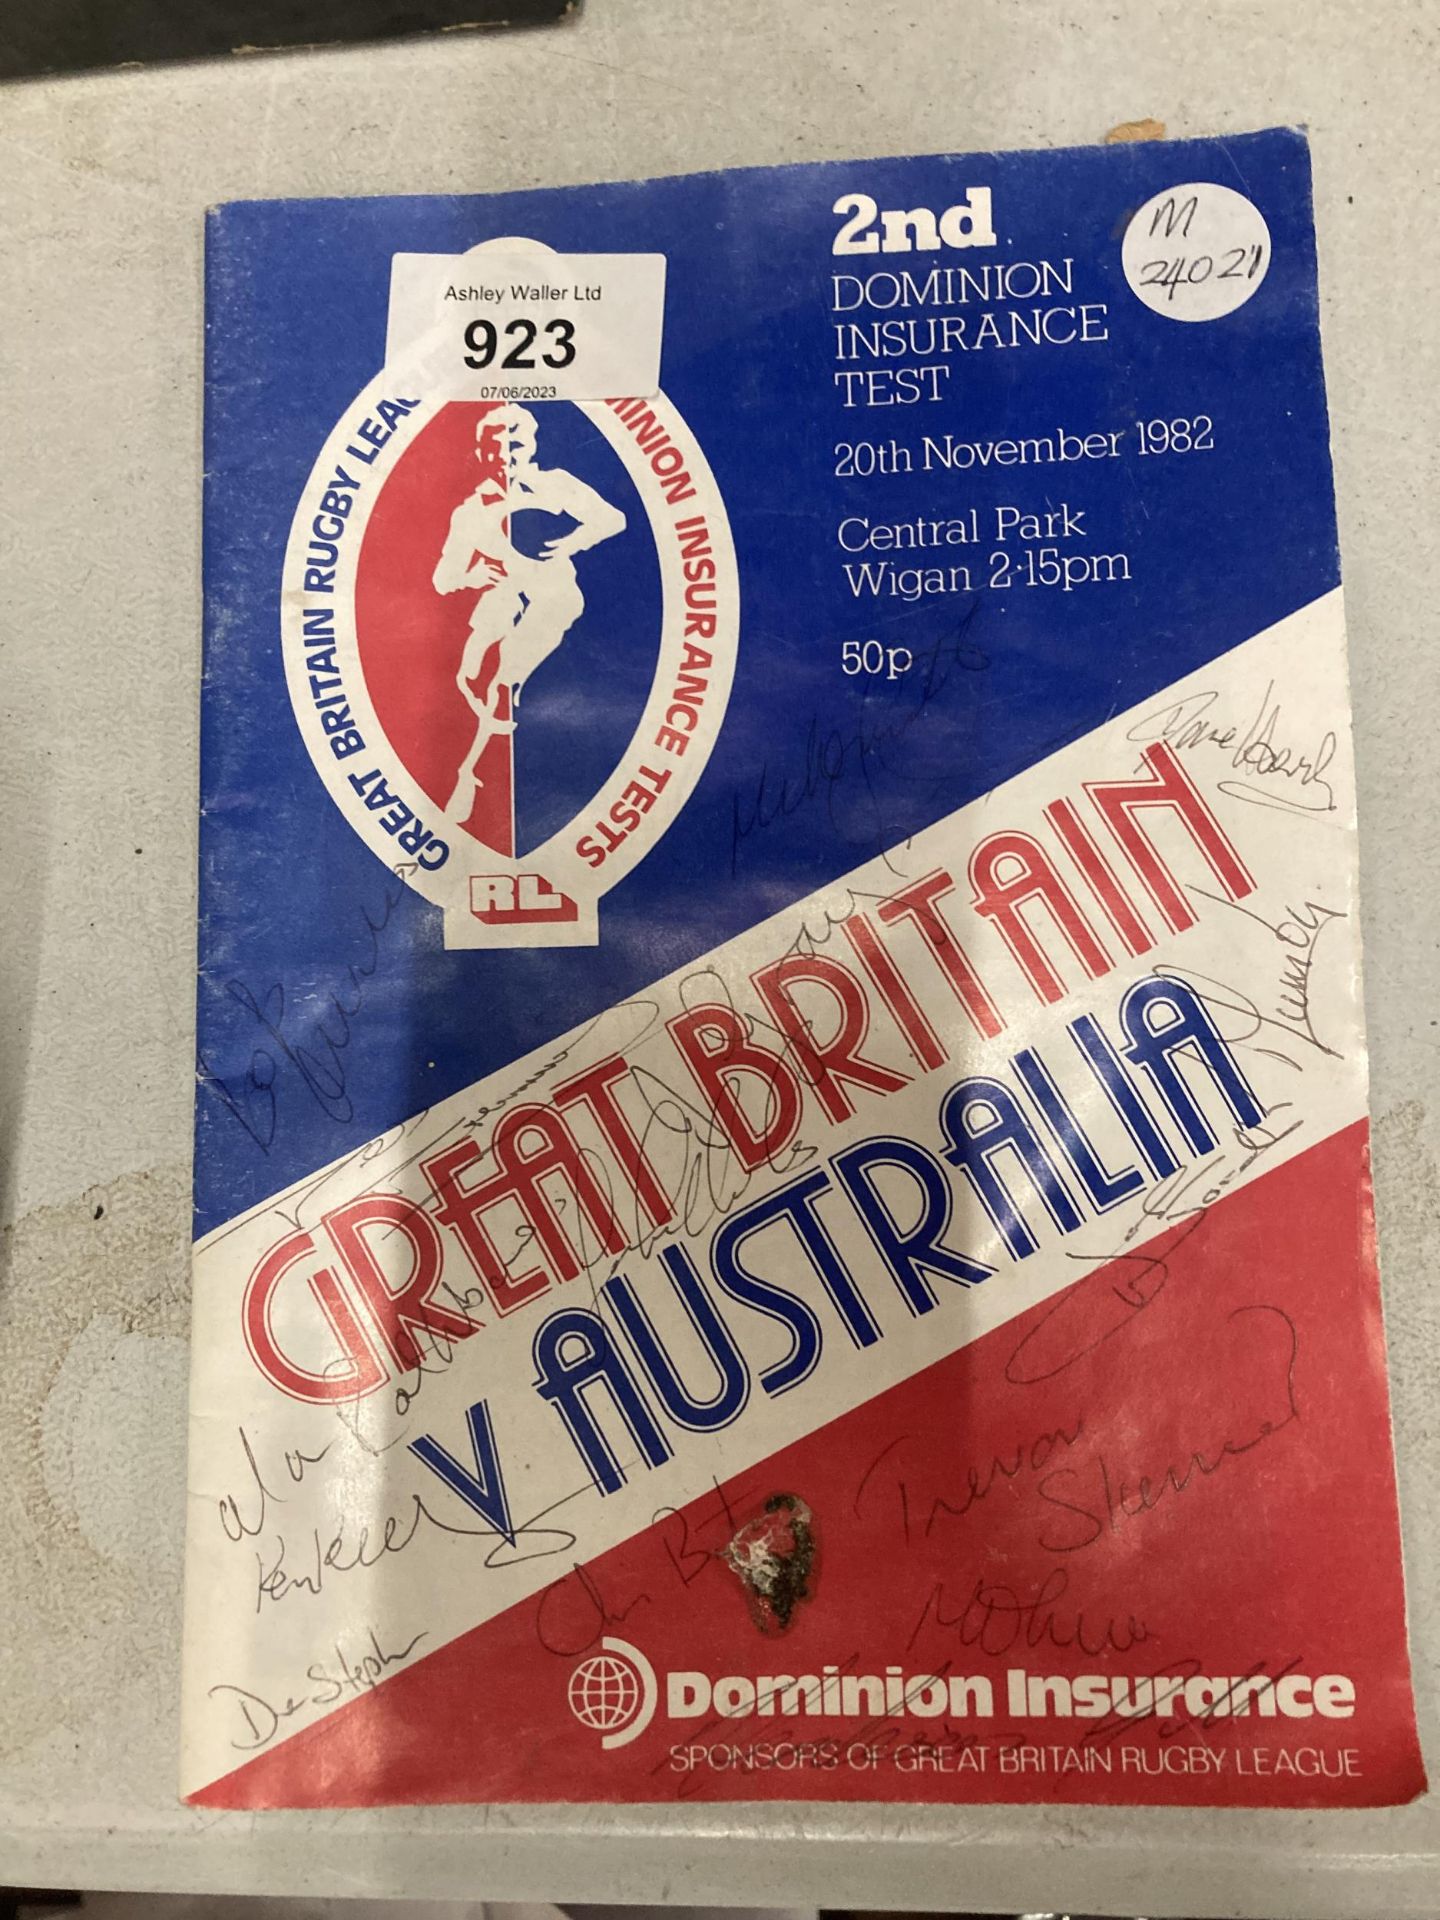 A 1982 GREAT BRITAIN V AUSTRALIA RUGBY LEAGUE PROGRAMME - WITH SIGNATURES TO THE FRONT COVER